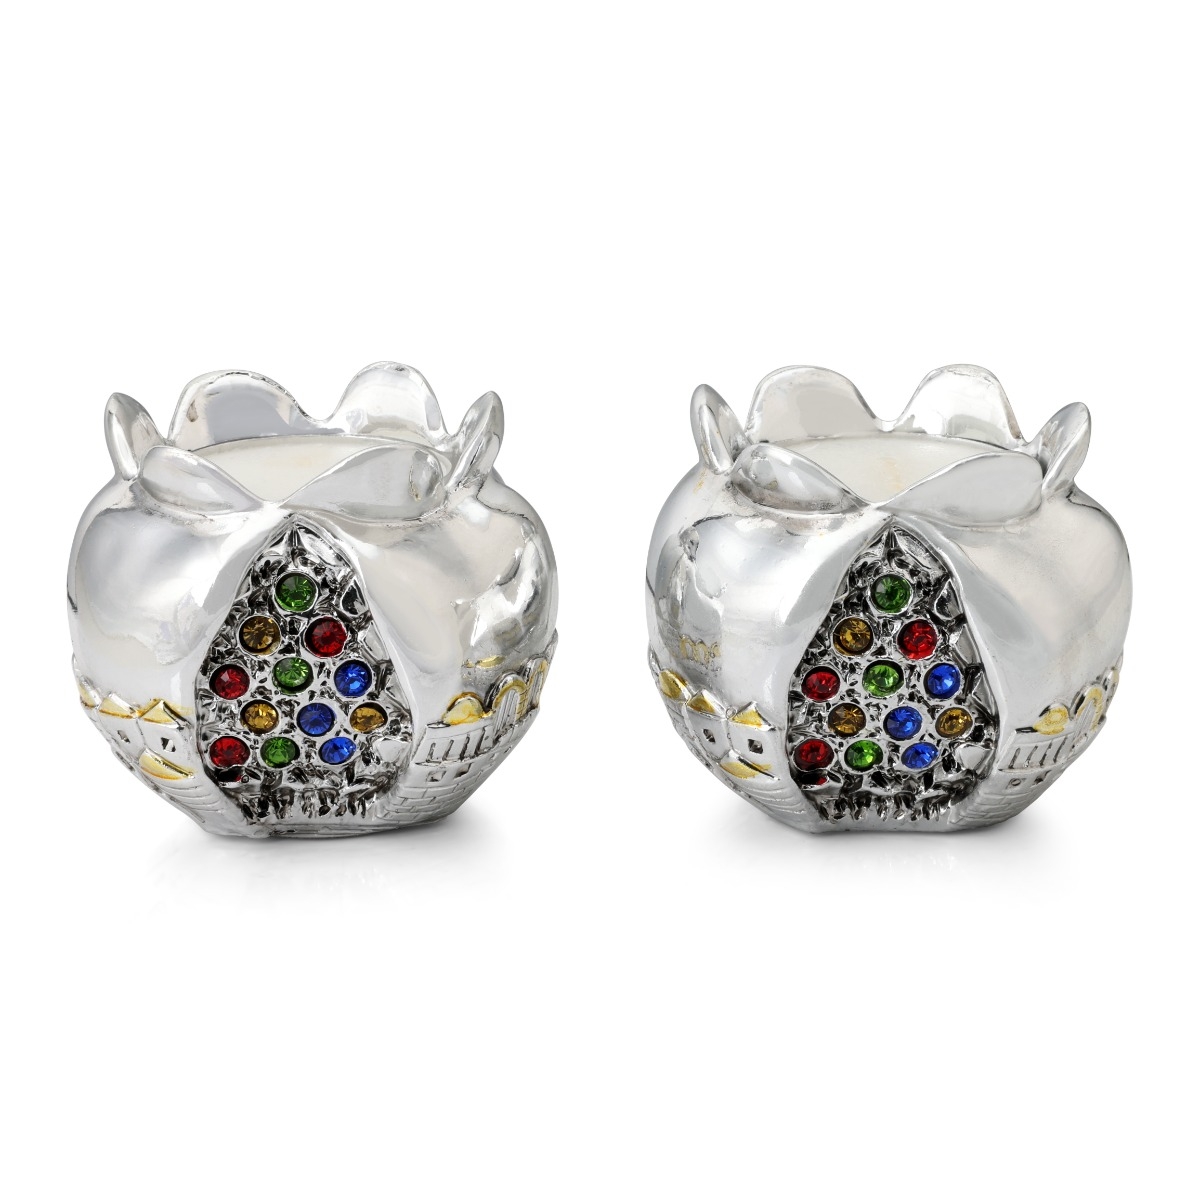  Silver Pomegranate Candlesticks with Colored Jewels and Golden Highlights - Jerusalem - 1